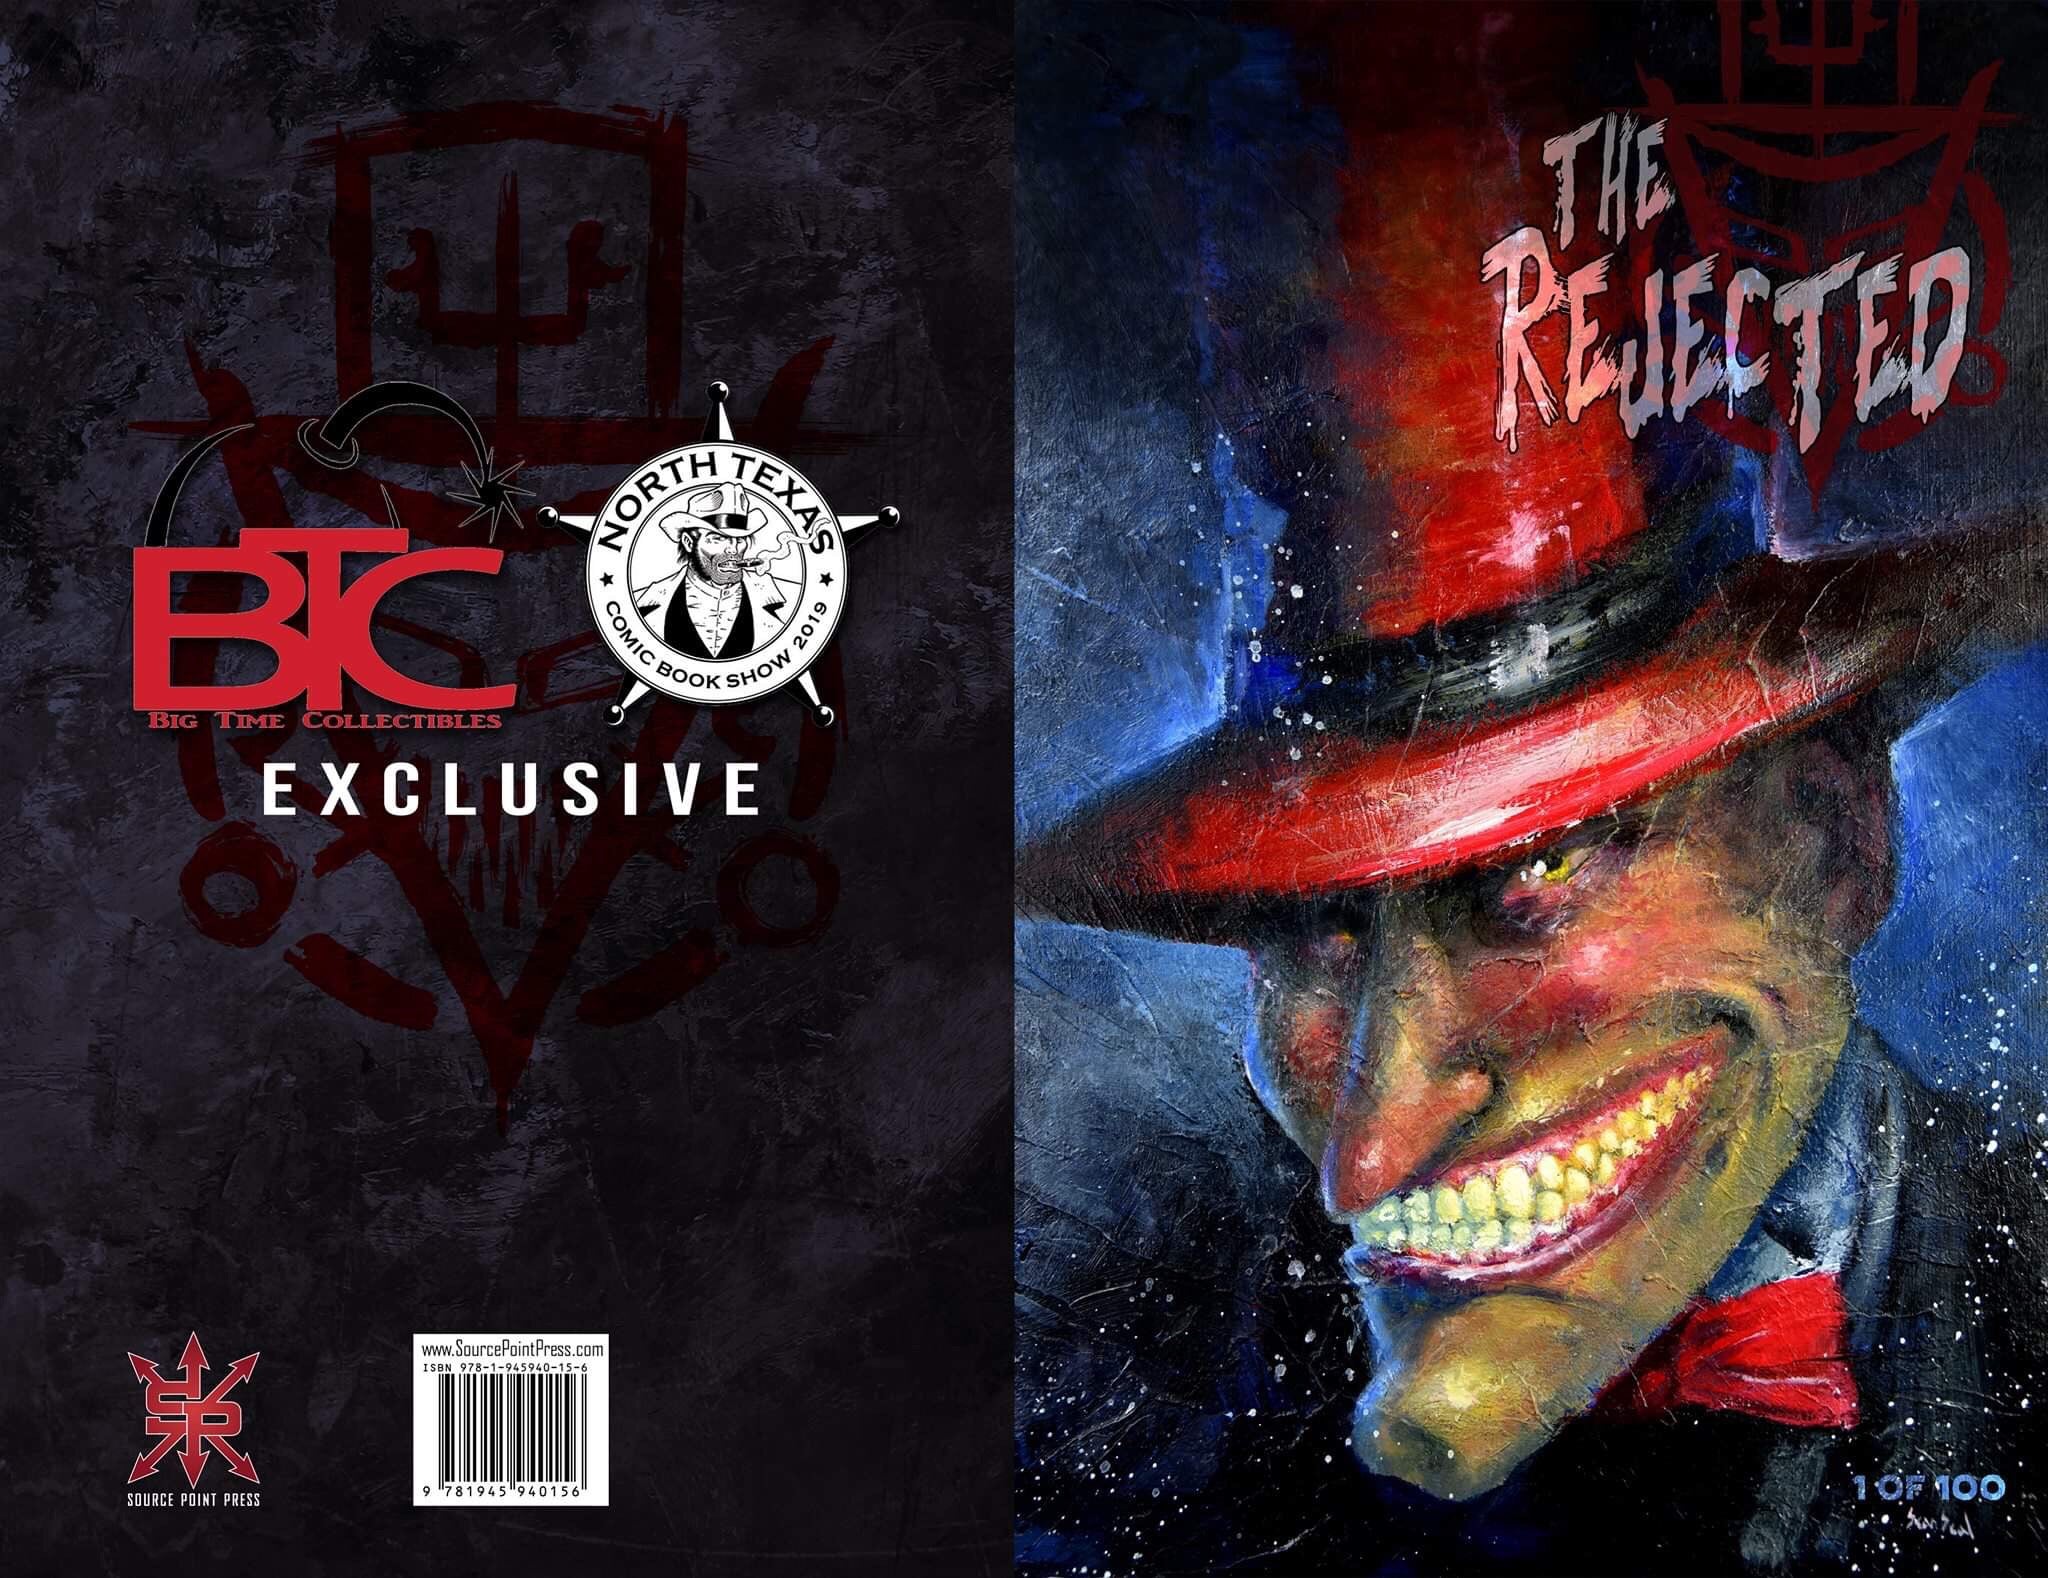 THE REJECTED #1 BTC & NTX COMIC BOOK SHOW EXCLUSIVE LTD TO 100 (I17)